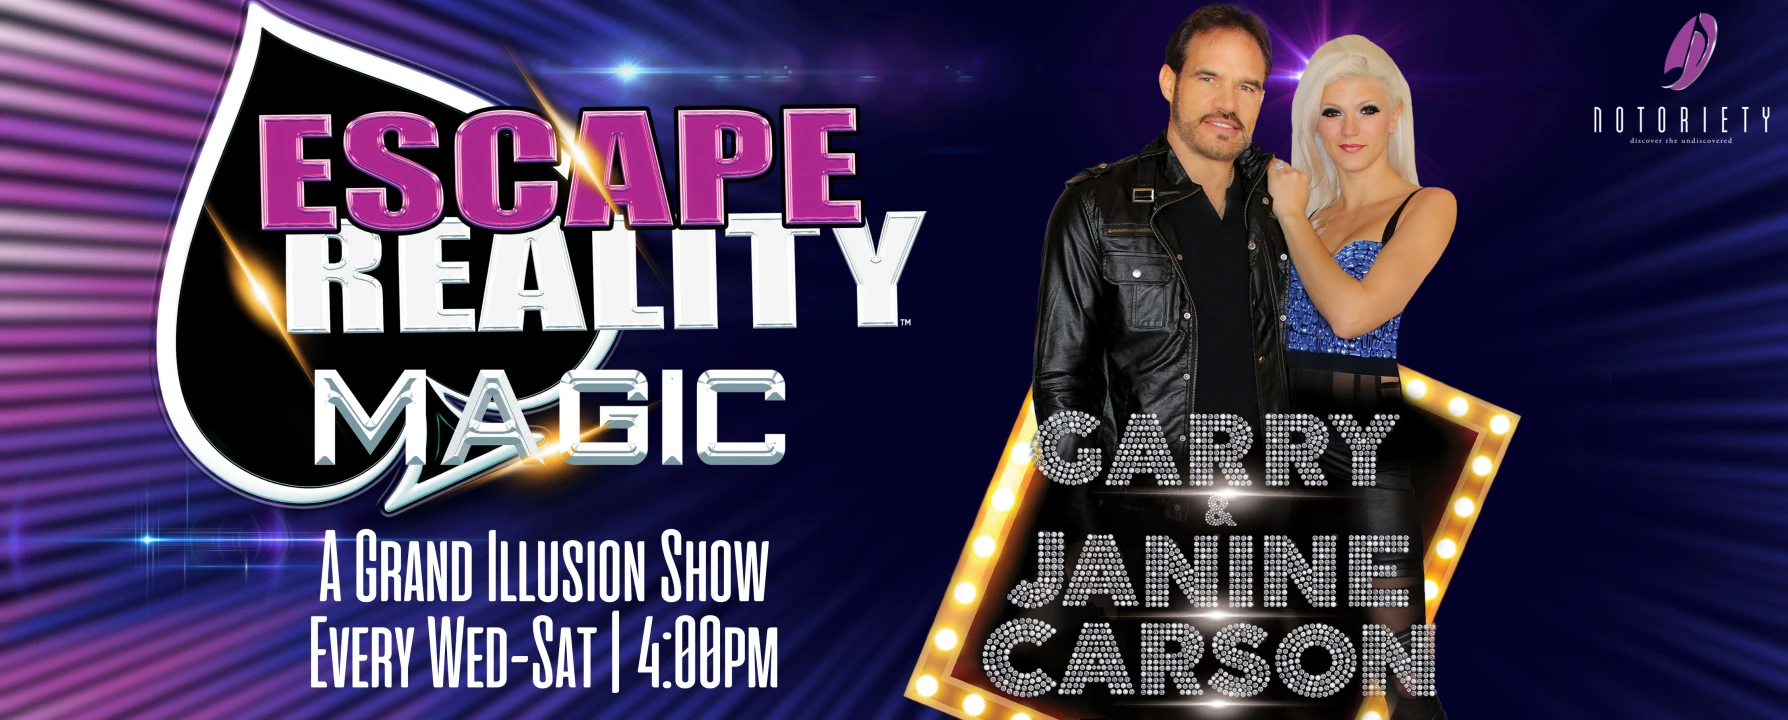 Escape Reality Magic of Garry & Janine Carson: What to expect - 1